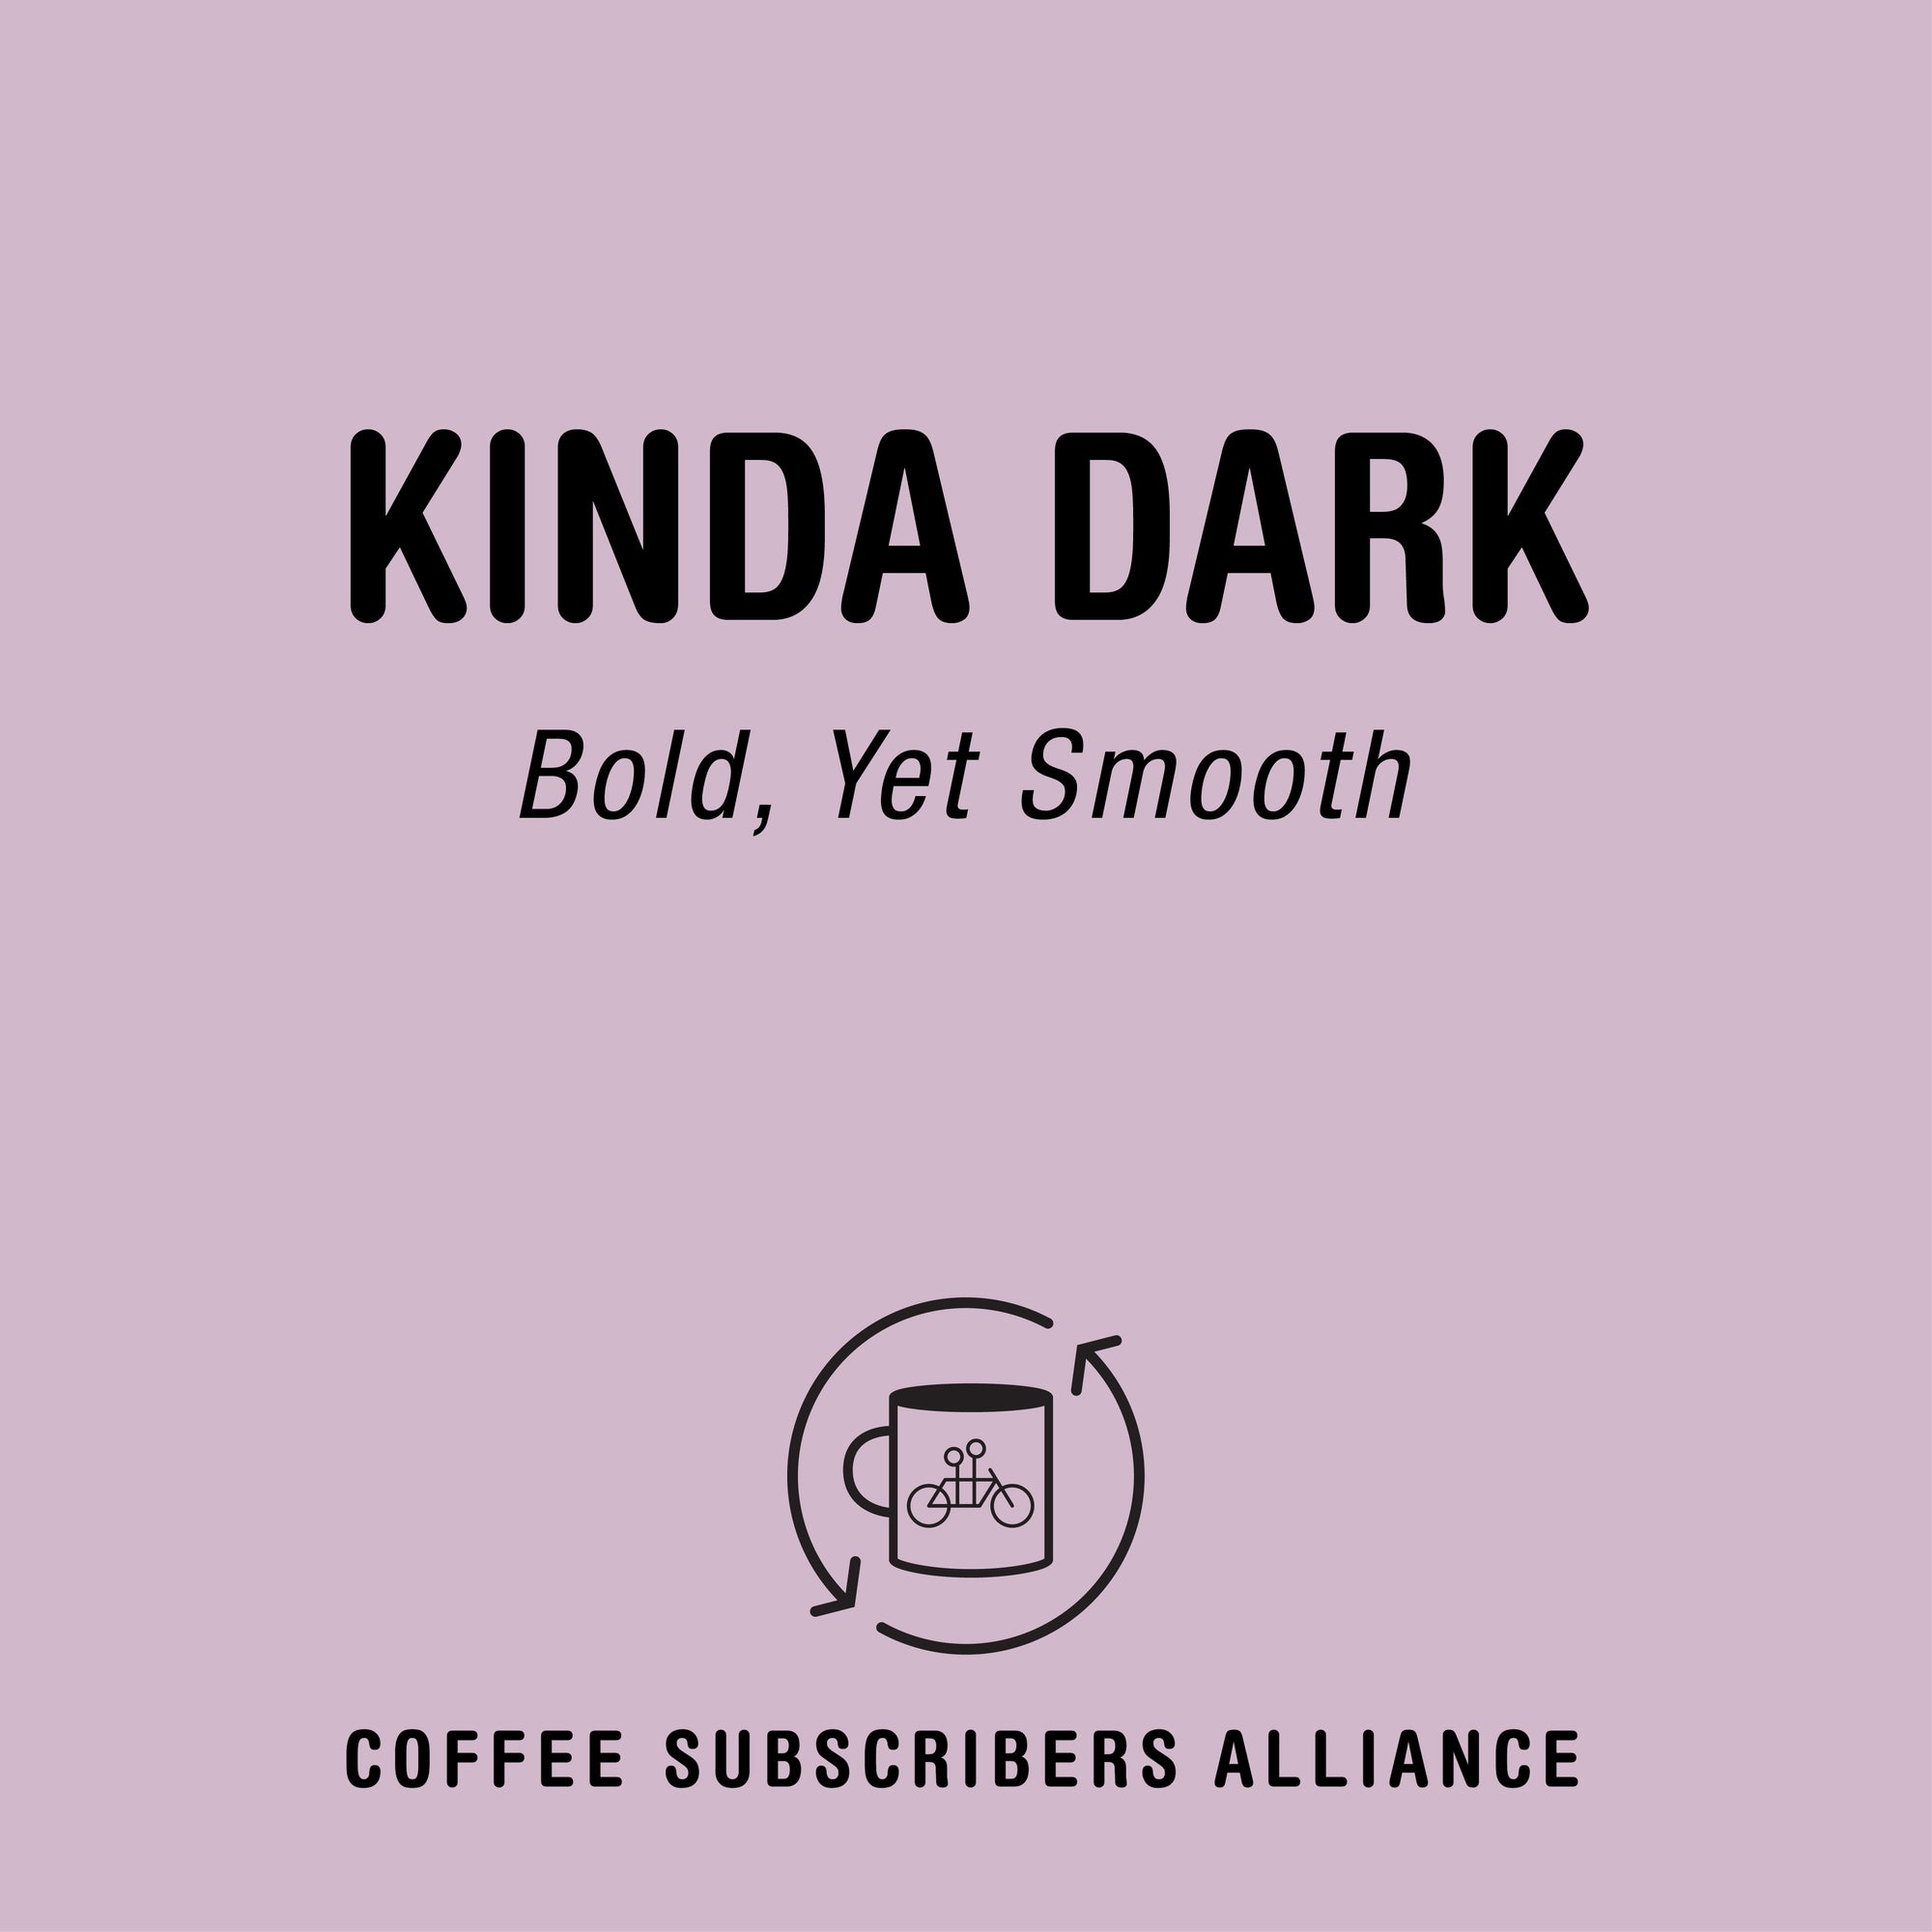 A promotional image with a pink background featuring text that reads "Kinda Dark, bold yet smooth" and a logo of a coffee cup with two coffee beans, captioned "Tandem Subscription Coffee Alliance.